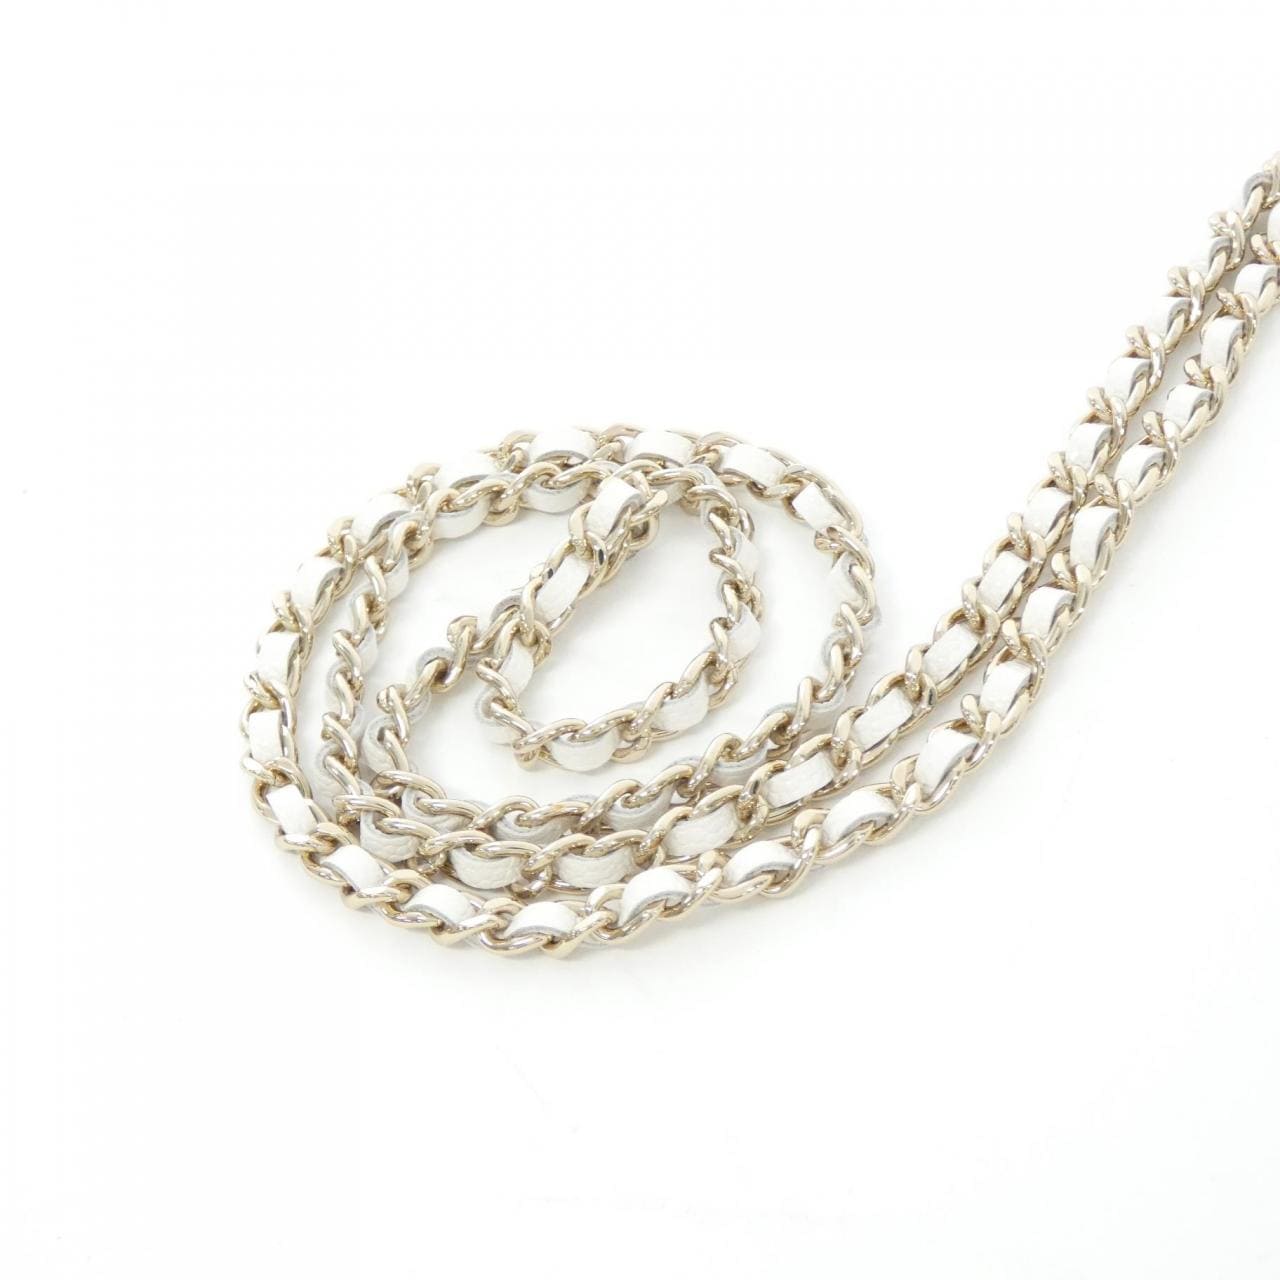 CHANEL Timeless Classic Line Chain Clutch